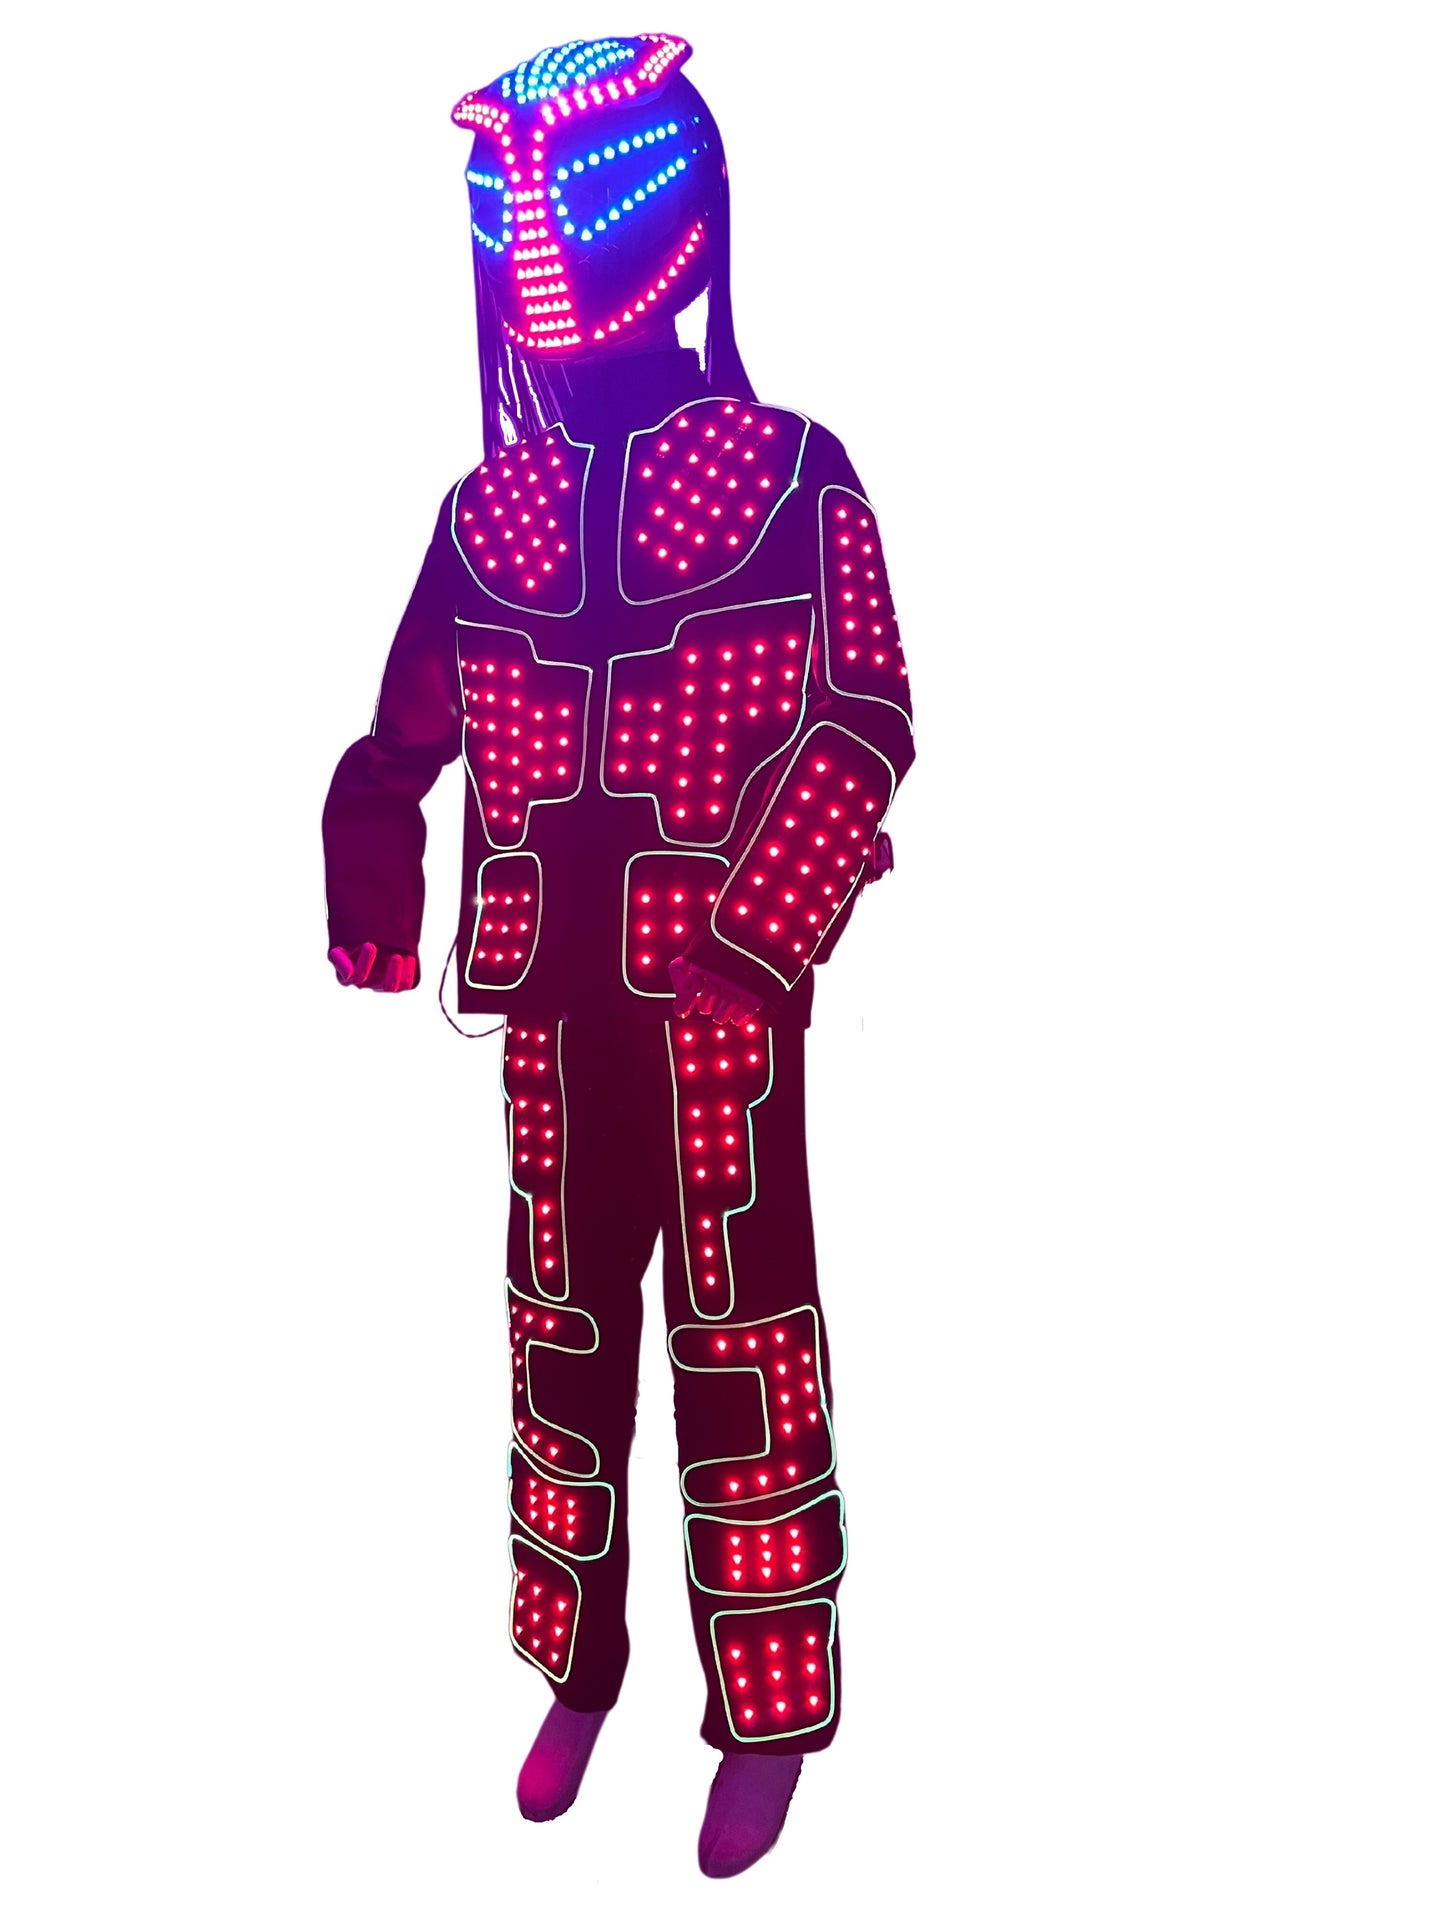 New LED Lighting Up Suits RGB Color Change Costumes with Helmets For Nightclub Dance DJ Show